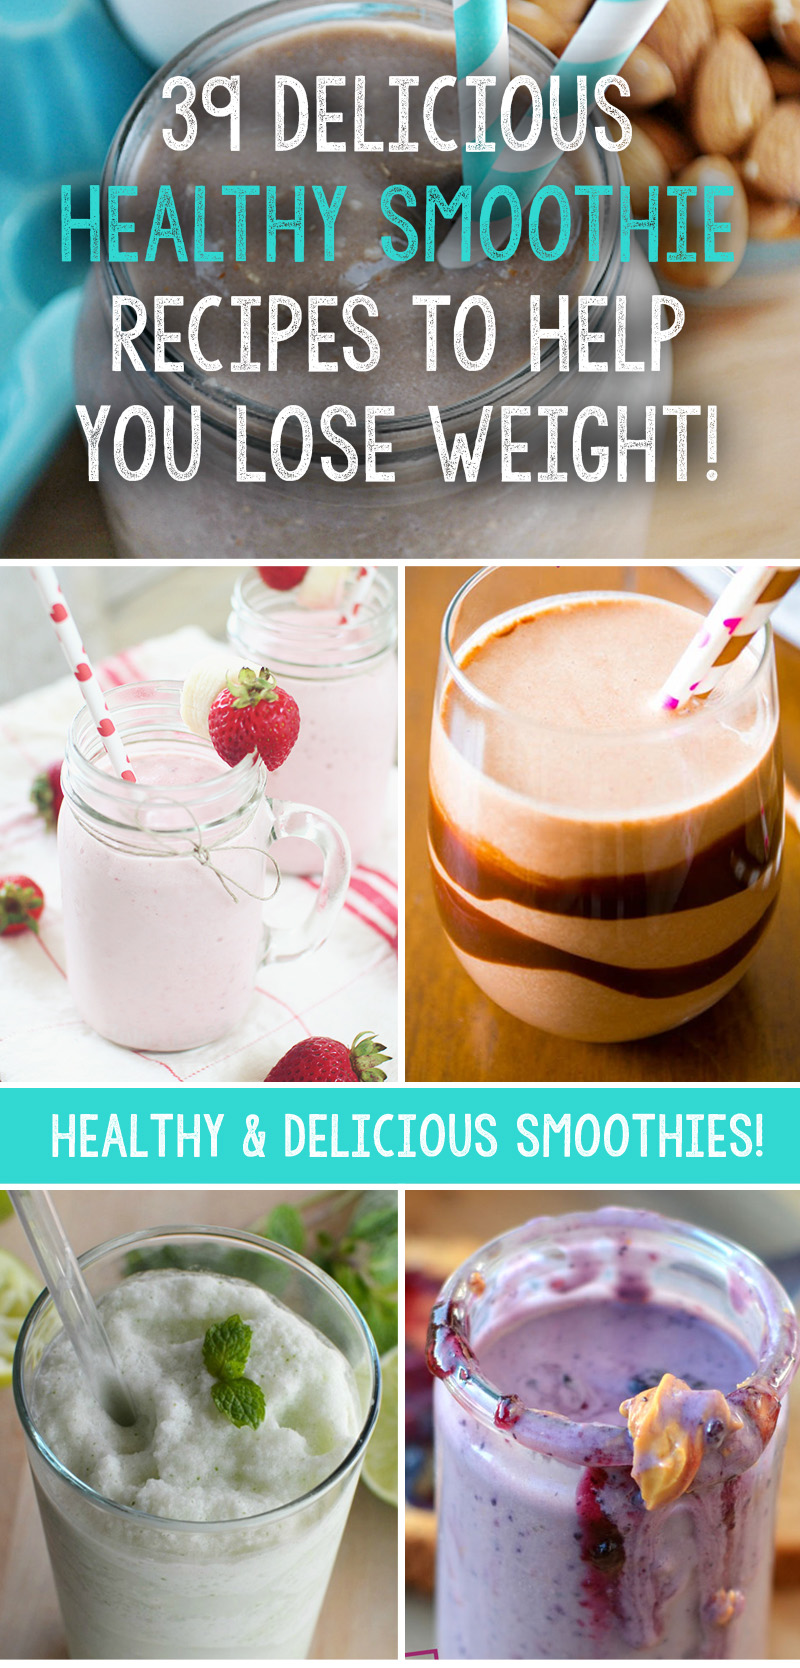 Weight Loss: Delicious breakfast smoothie recipes for weight loss